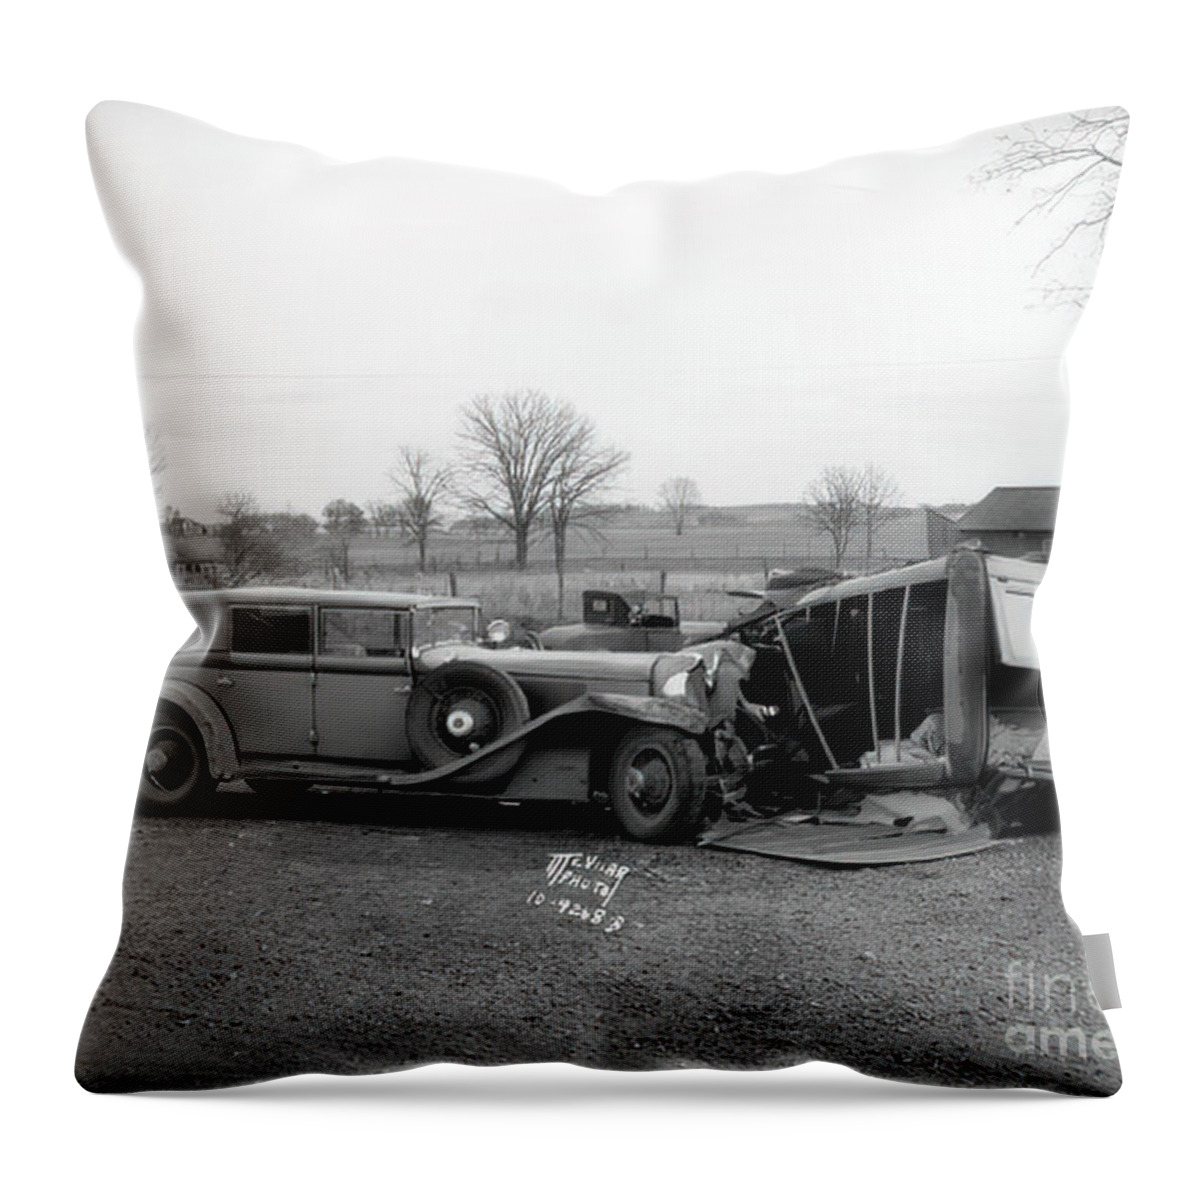 Vintage Throw Pillow featuring the photograph 1930 L29 Cord Convertible Sedan Crash Scene by Retrographs